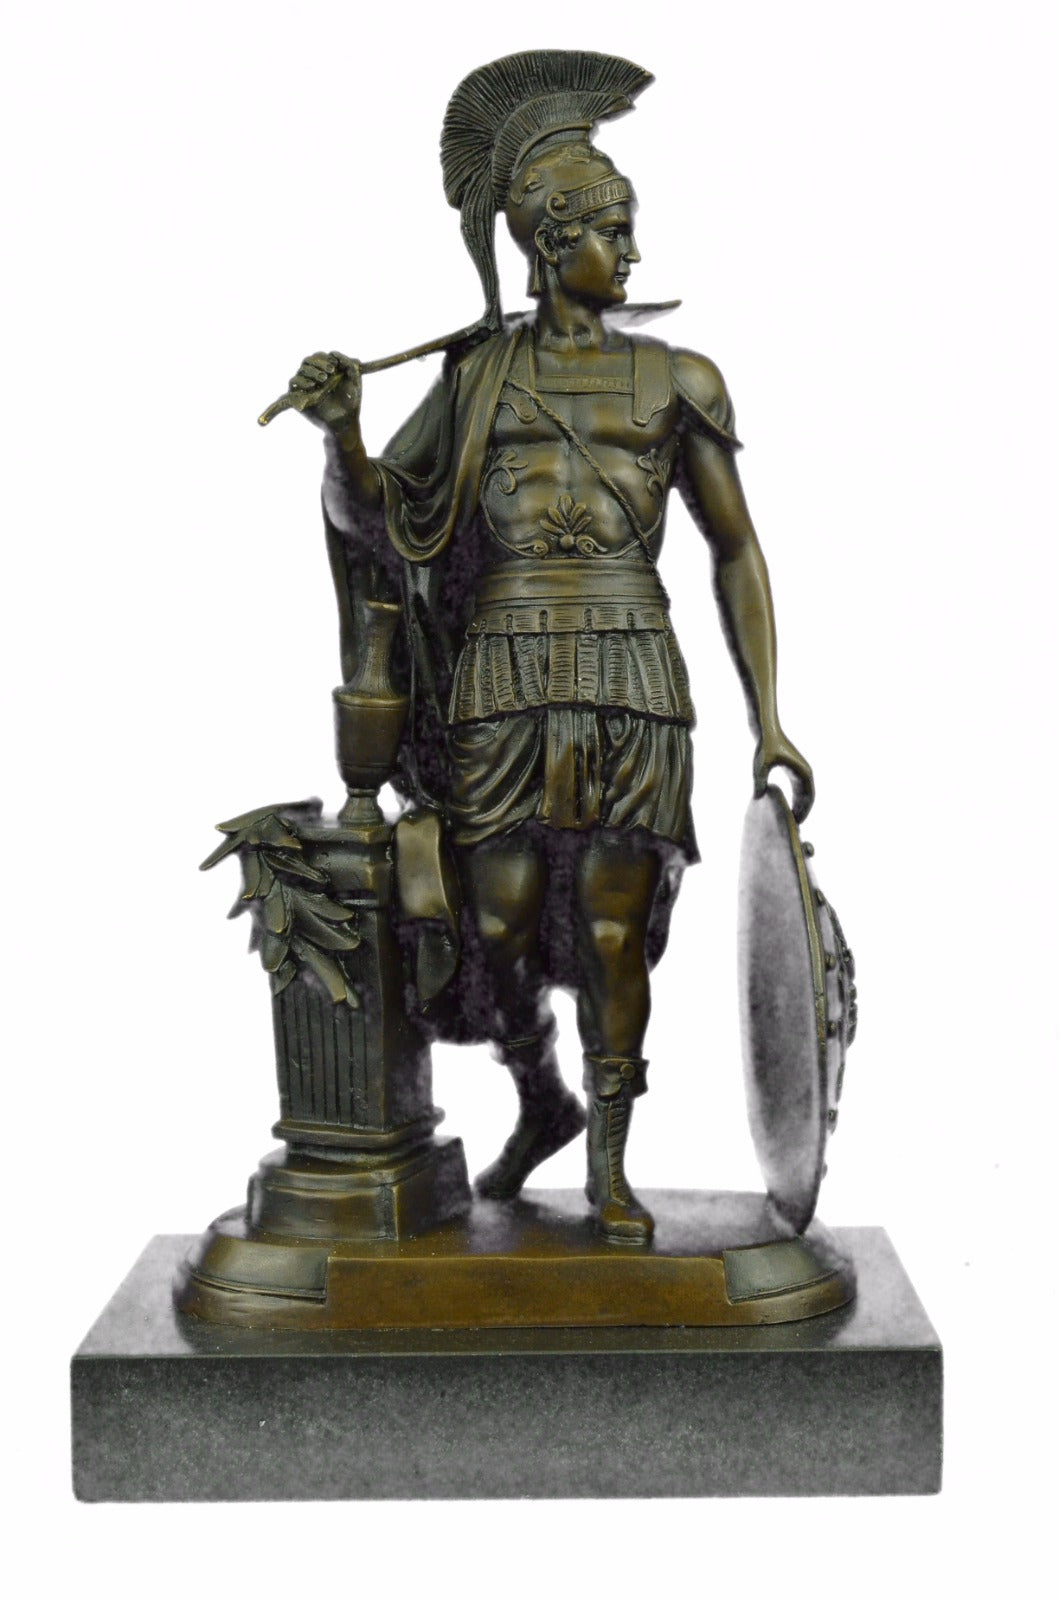 Odysseus Hot Cast Classic Collectible Greek/Roman Famous Soldier by Hu